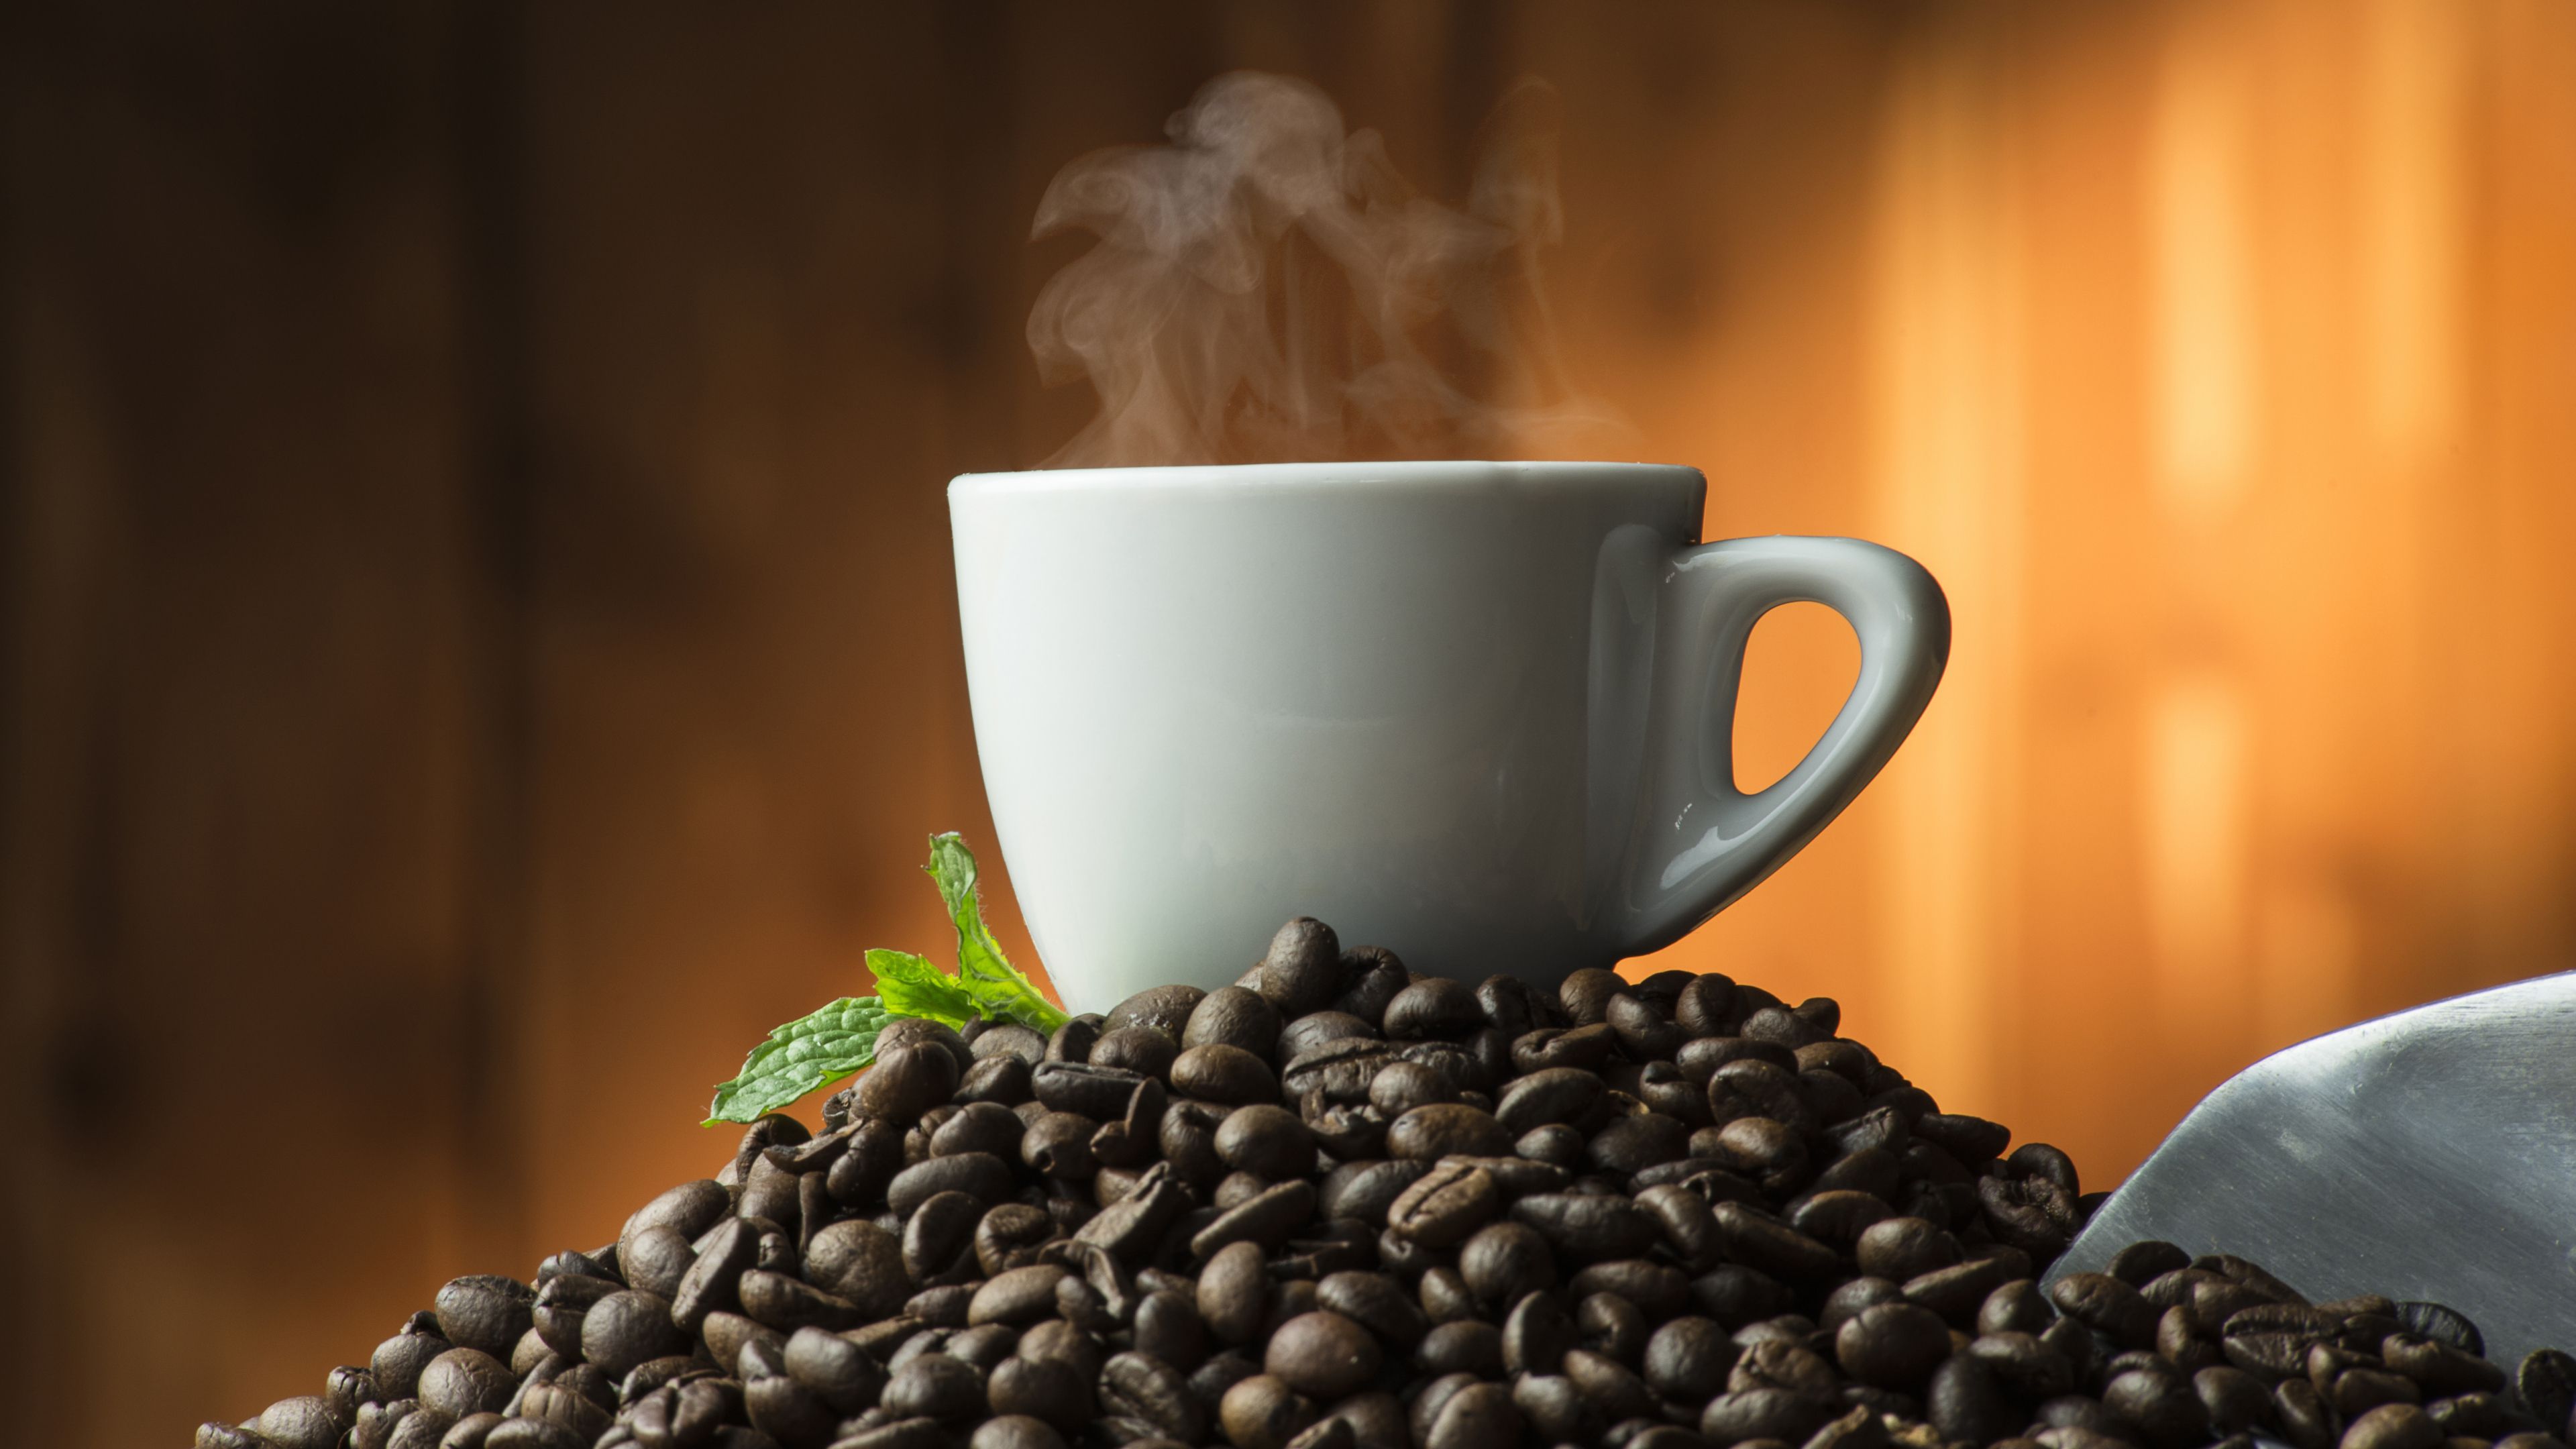 Download 3840x2160 wallpaper coffee cup, smoke, beans, 4k, uhd 16: widescreen, 3840x2160 HD image, background, 18404